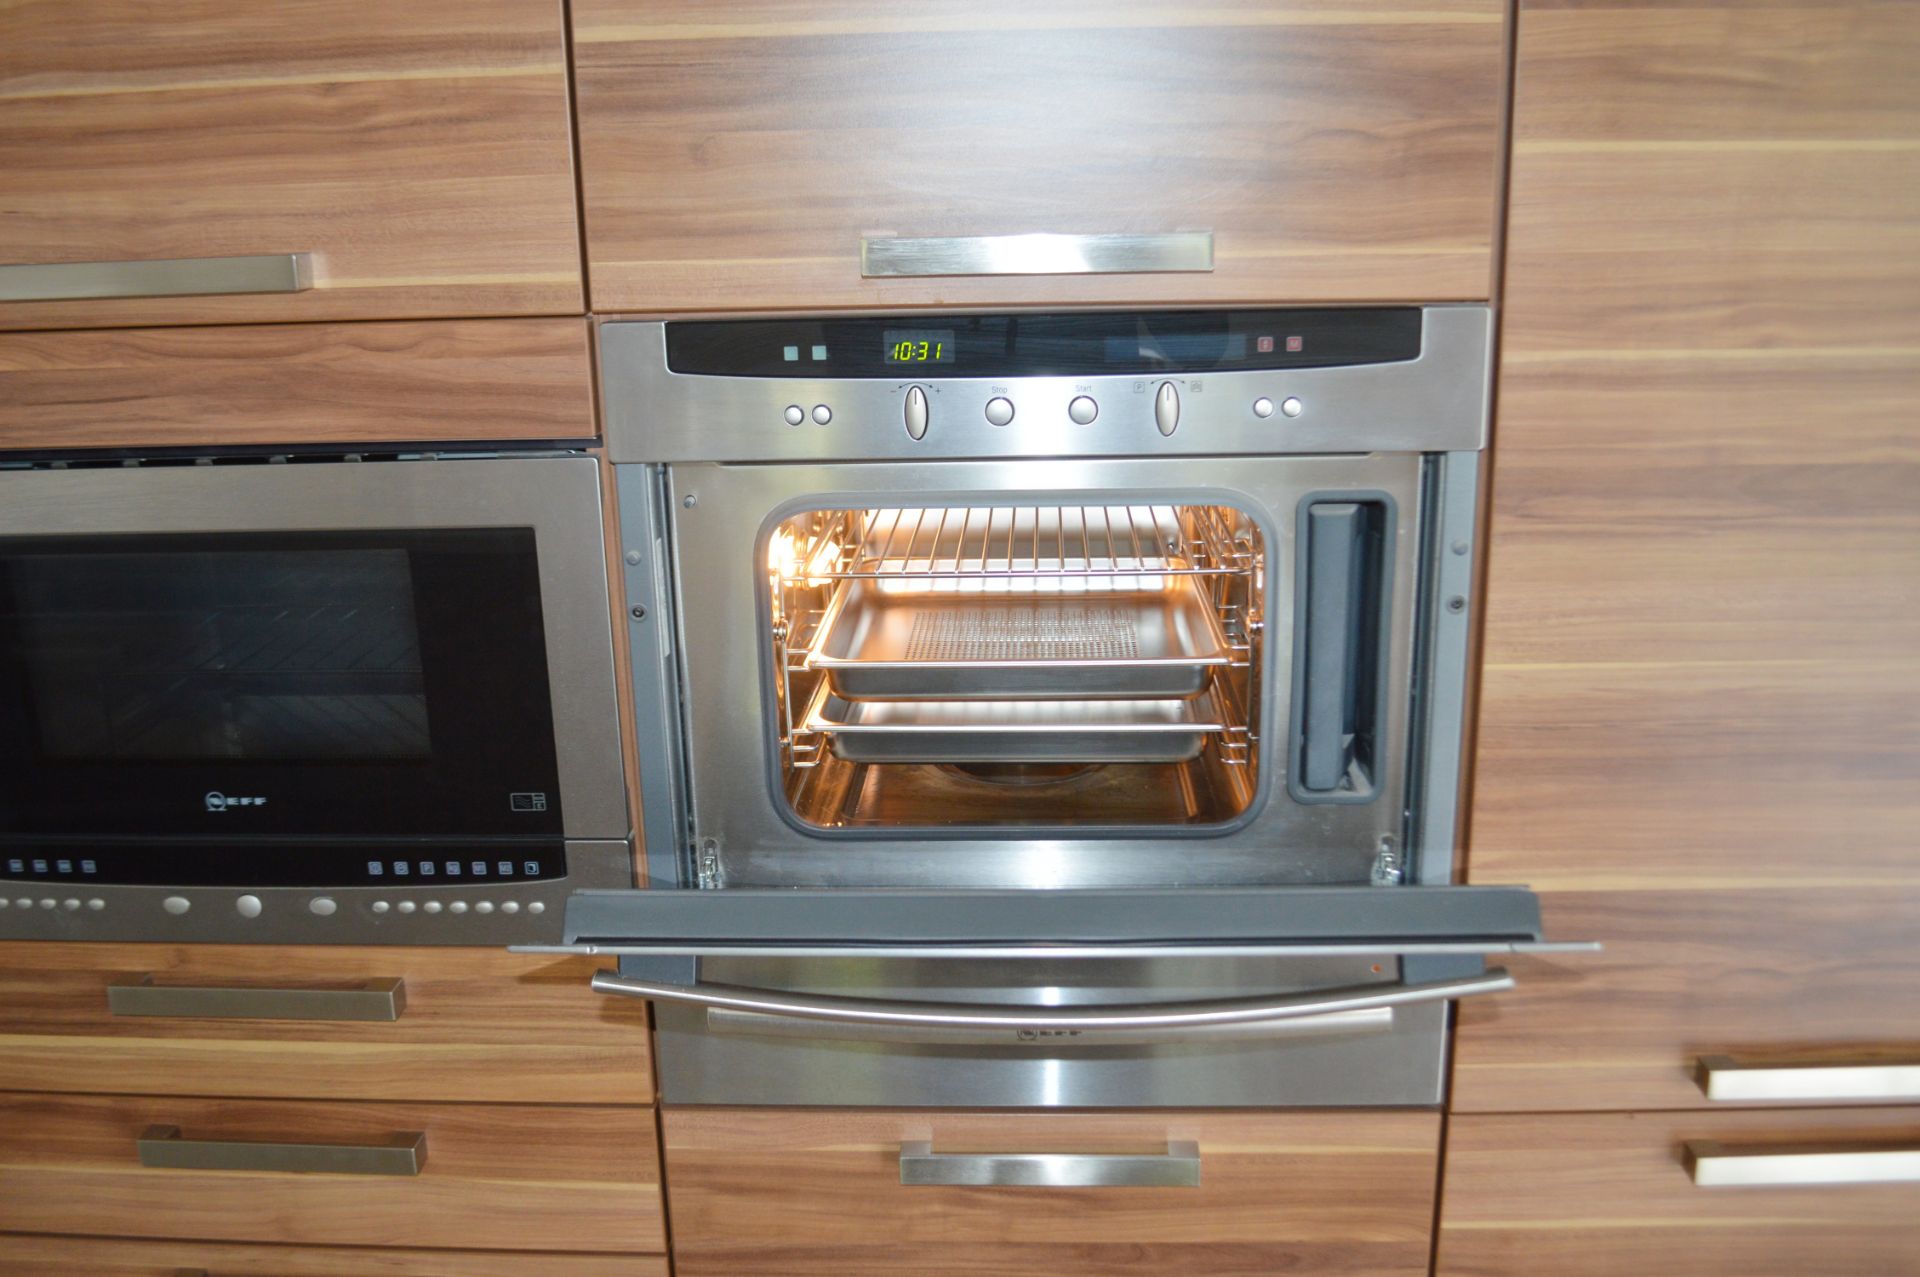 1 x Contemporary Bespoke Fitted Kitchen With Neff Branded Appliances - Collection Date: 1st November - Image 51 of 52